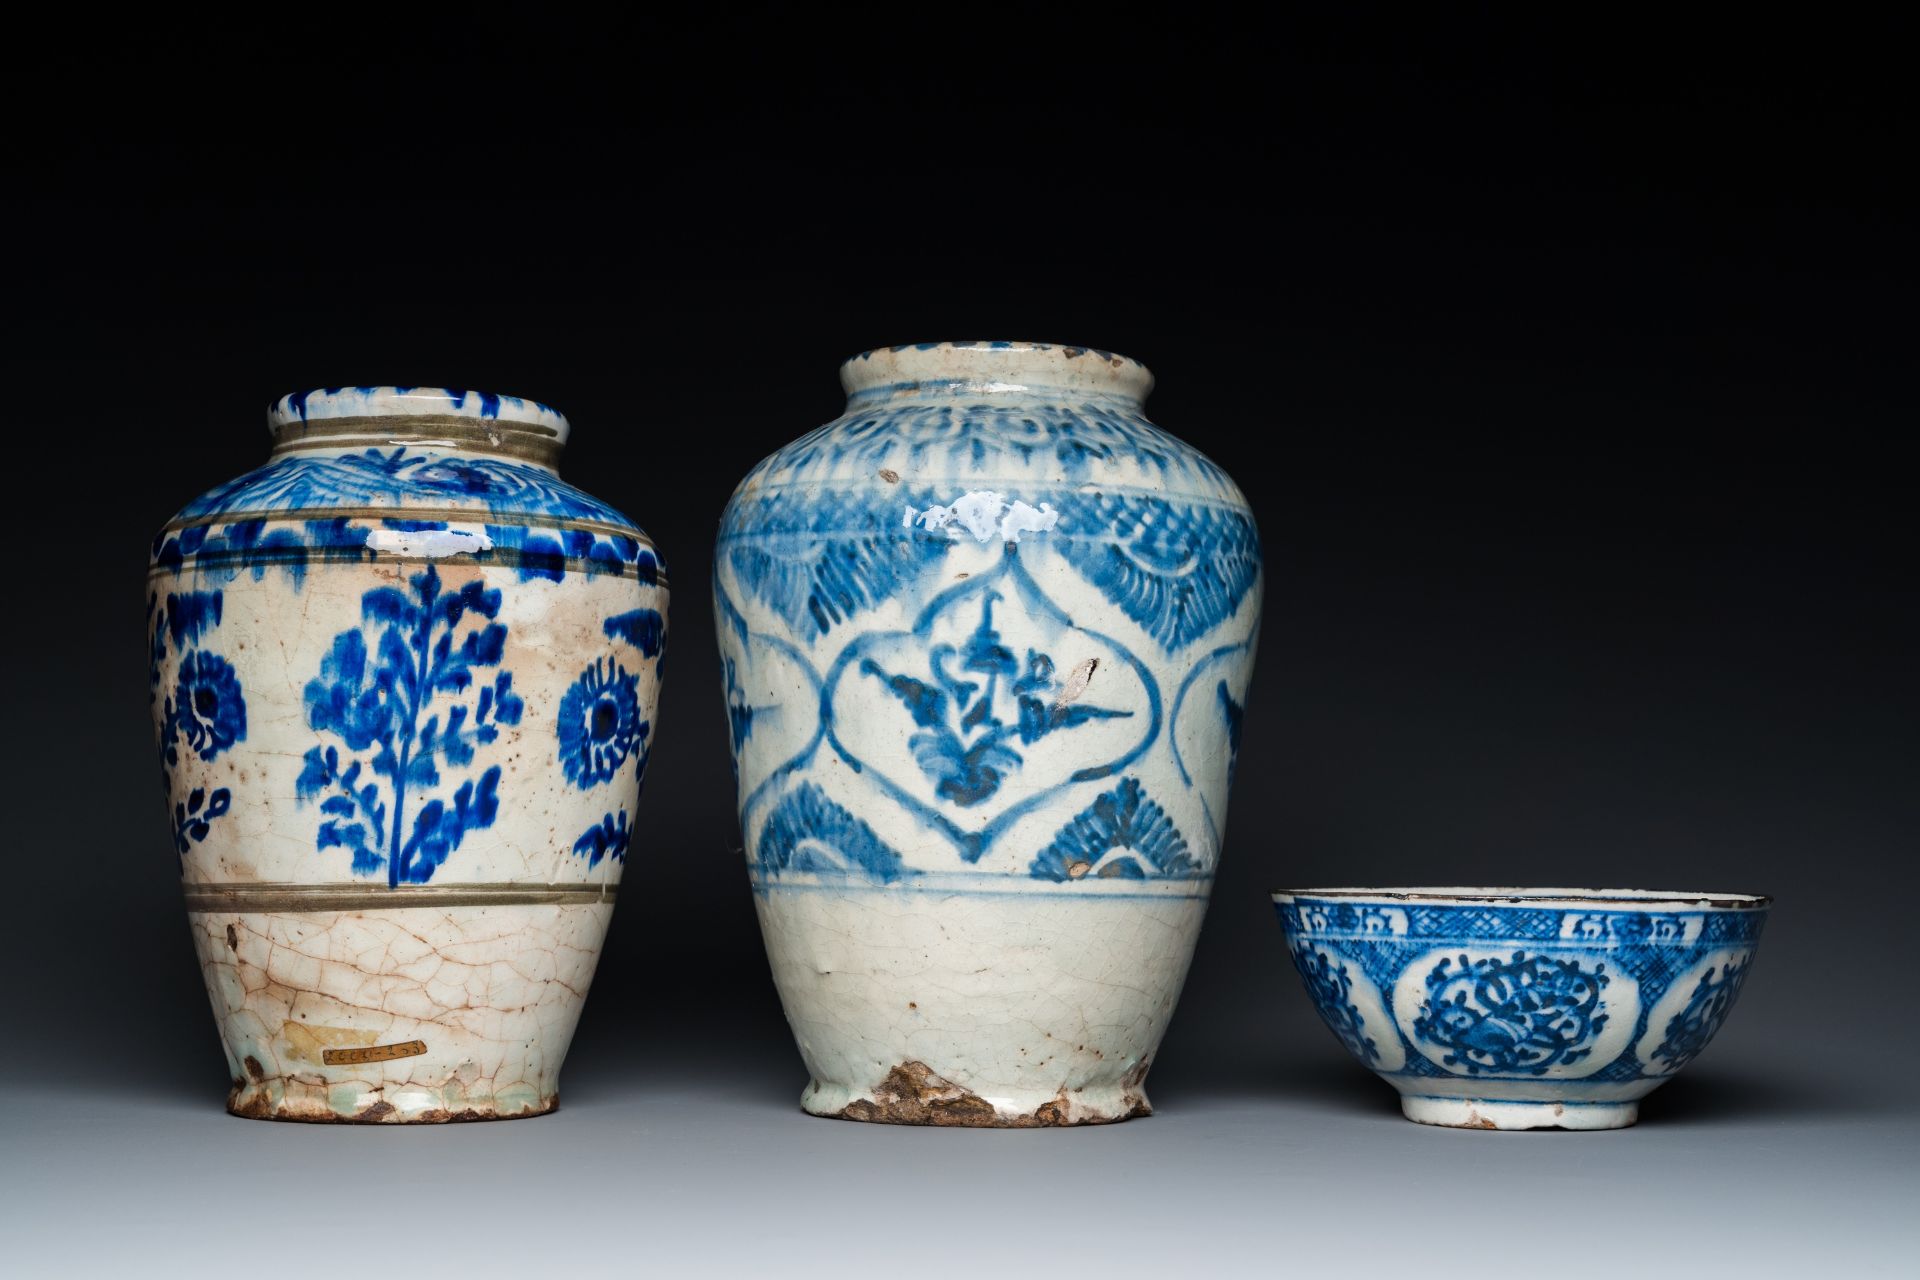 Two blue and white Islamic pottery storage jars and a bowl, Persia, 17/19th C. - Image 5 of 7